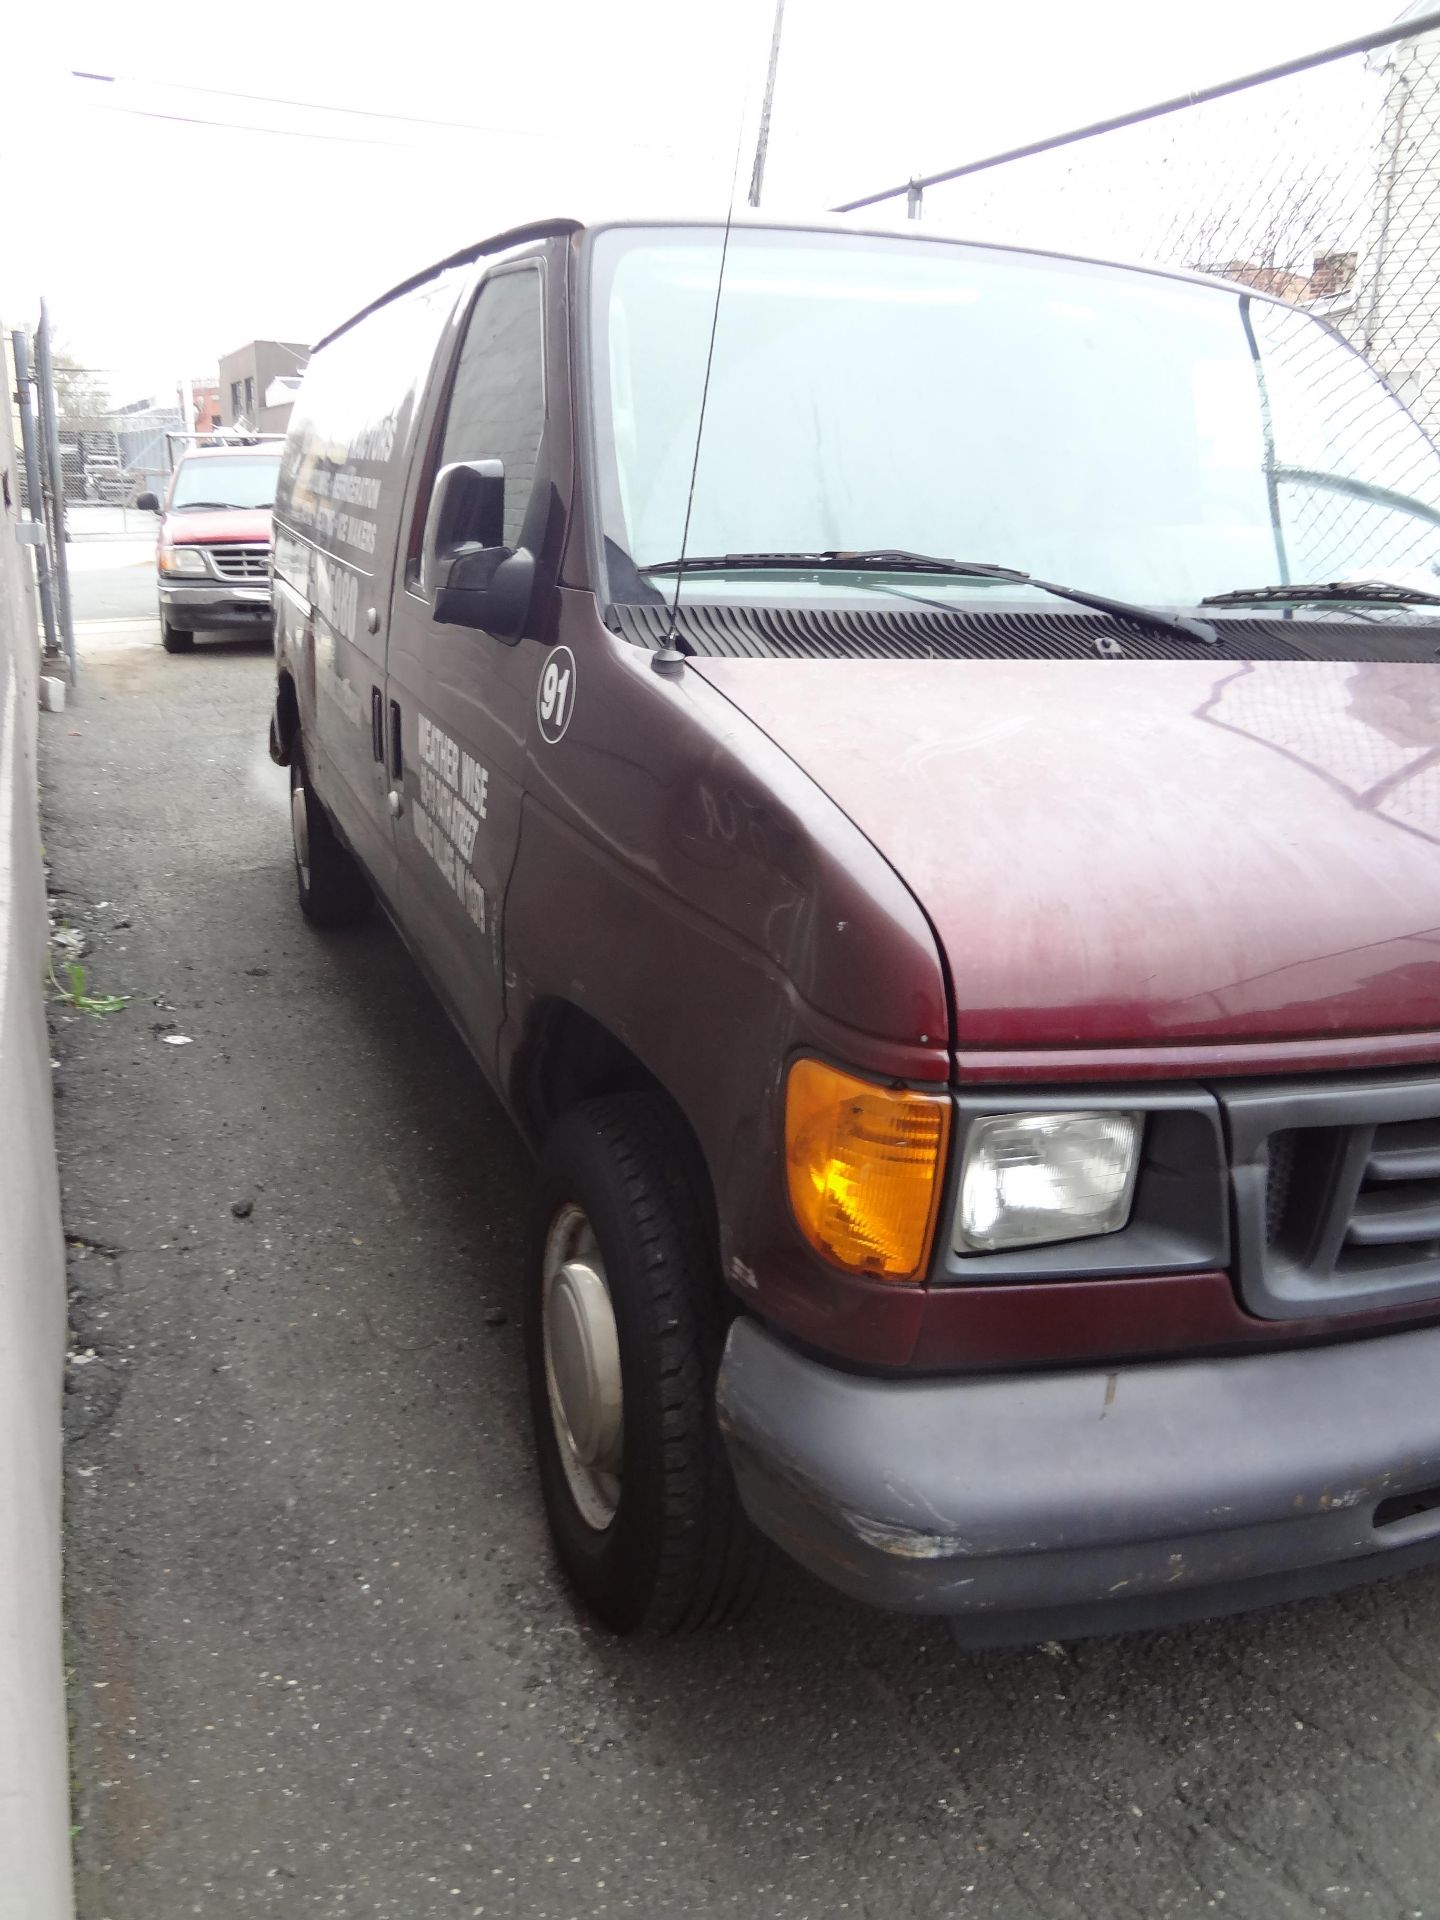 2006 FORD E-250 WORK VAN, APPROXIMATELY 148,000 MILES - Image 12 of 17